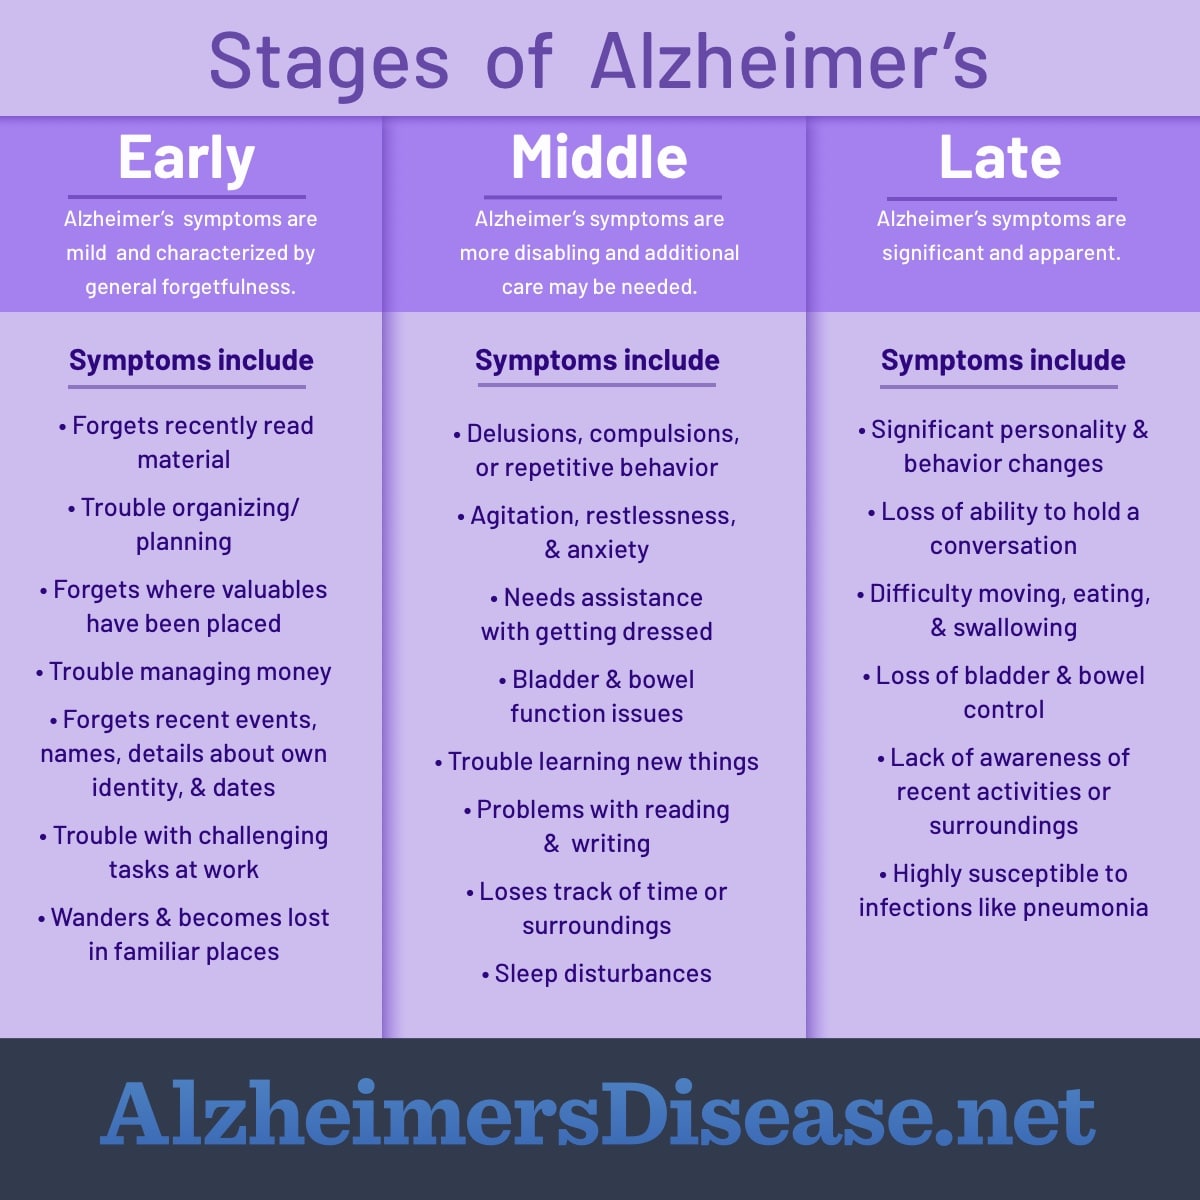 What Are the Three Stages of Alzheimer